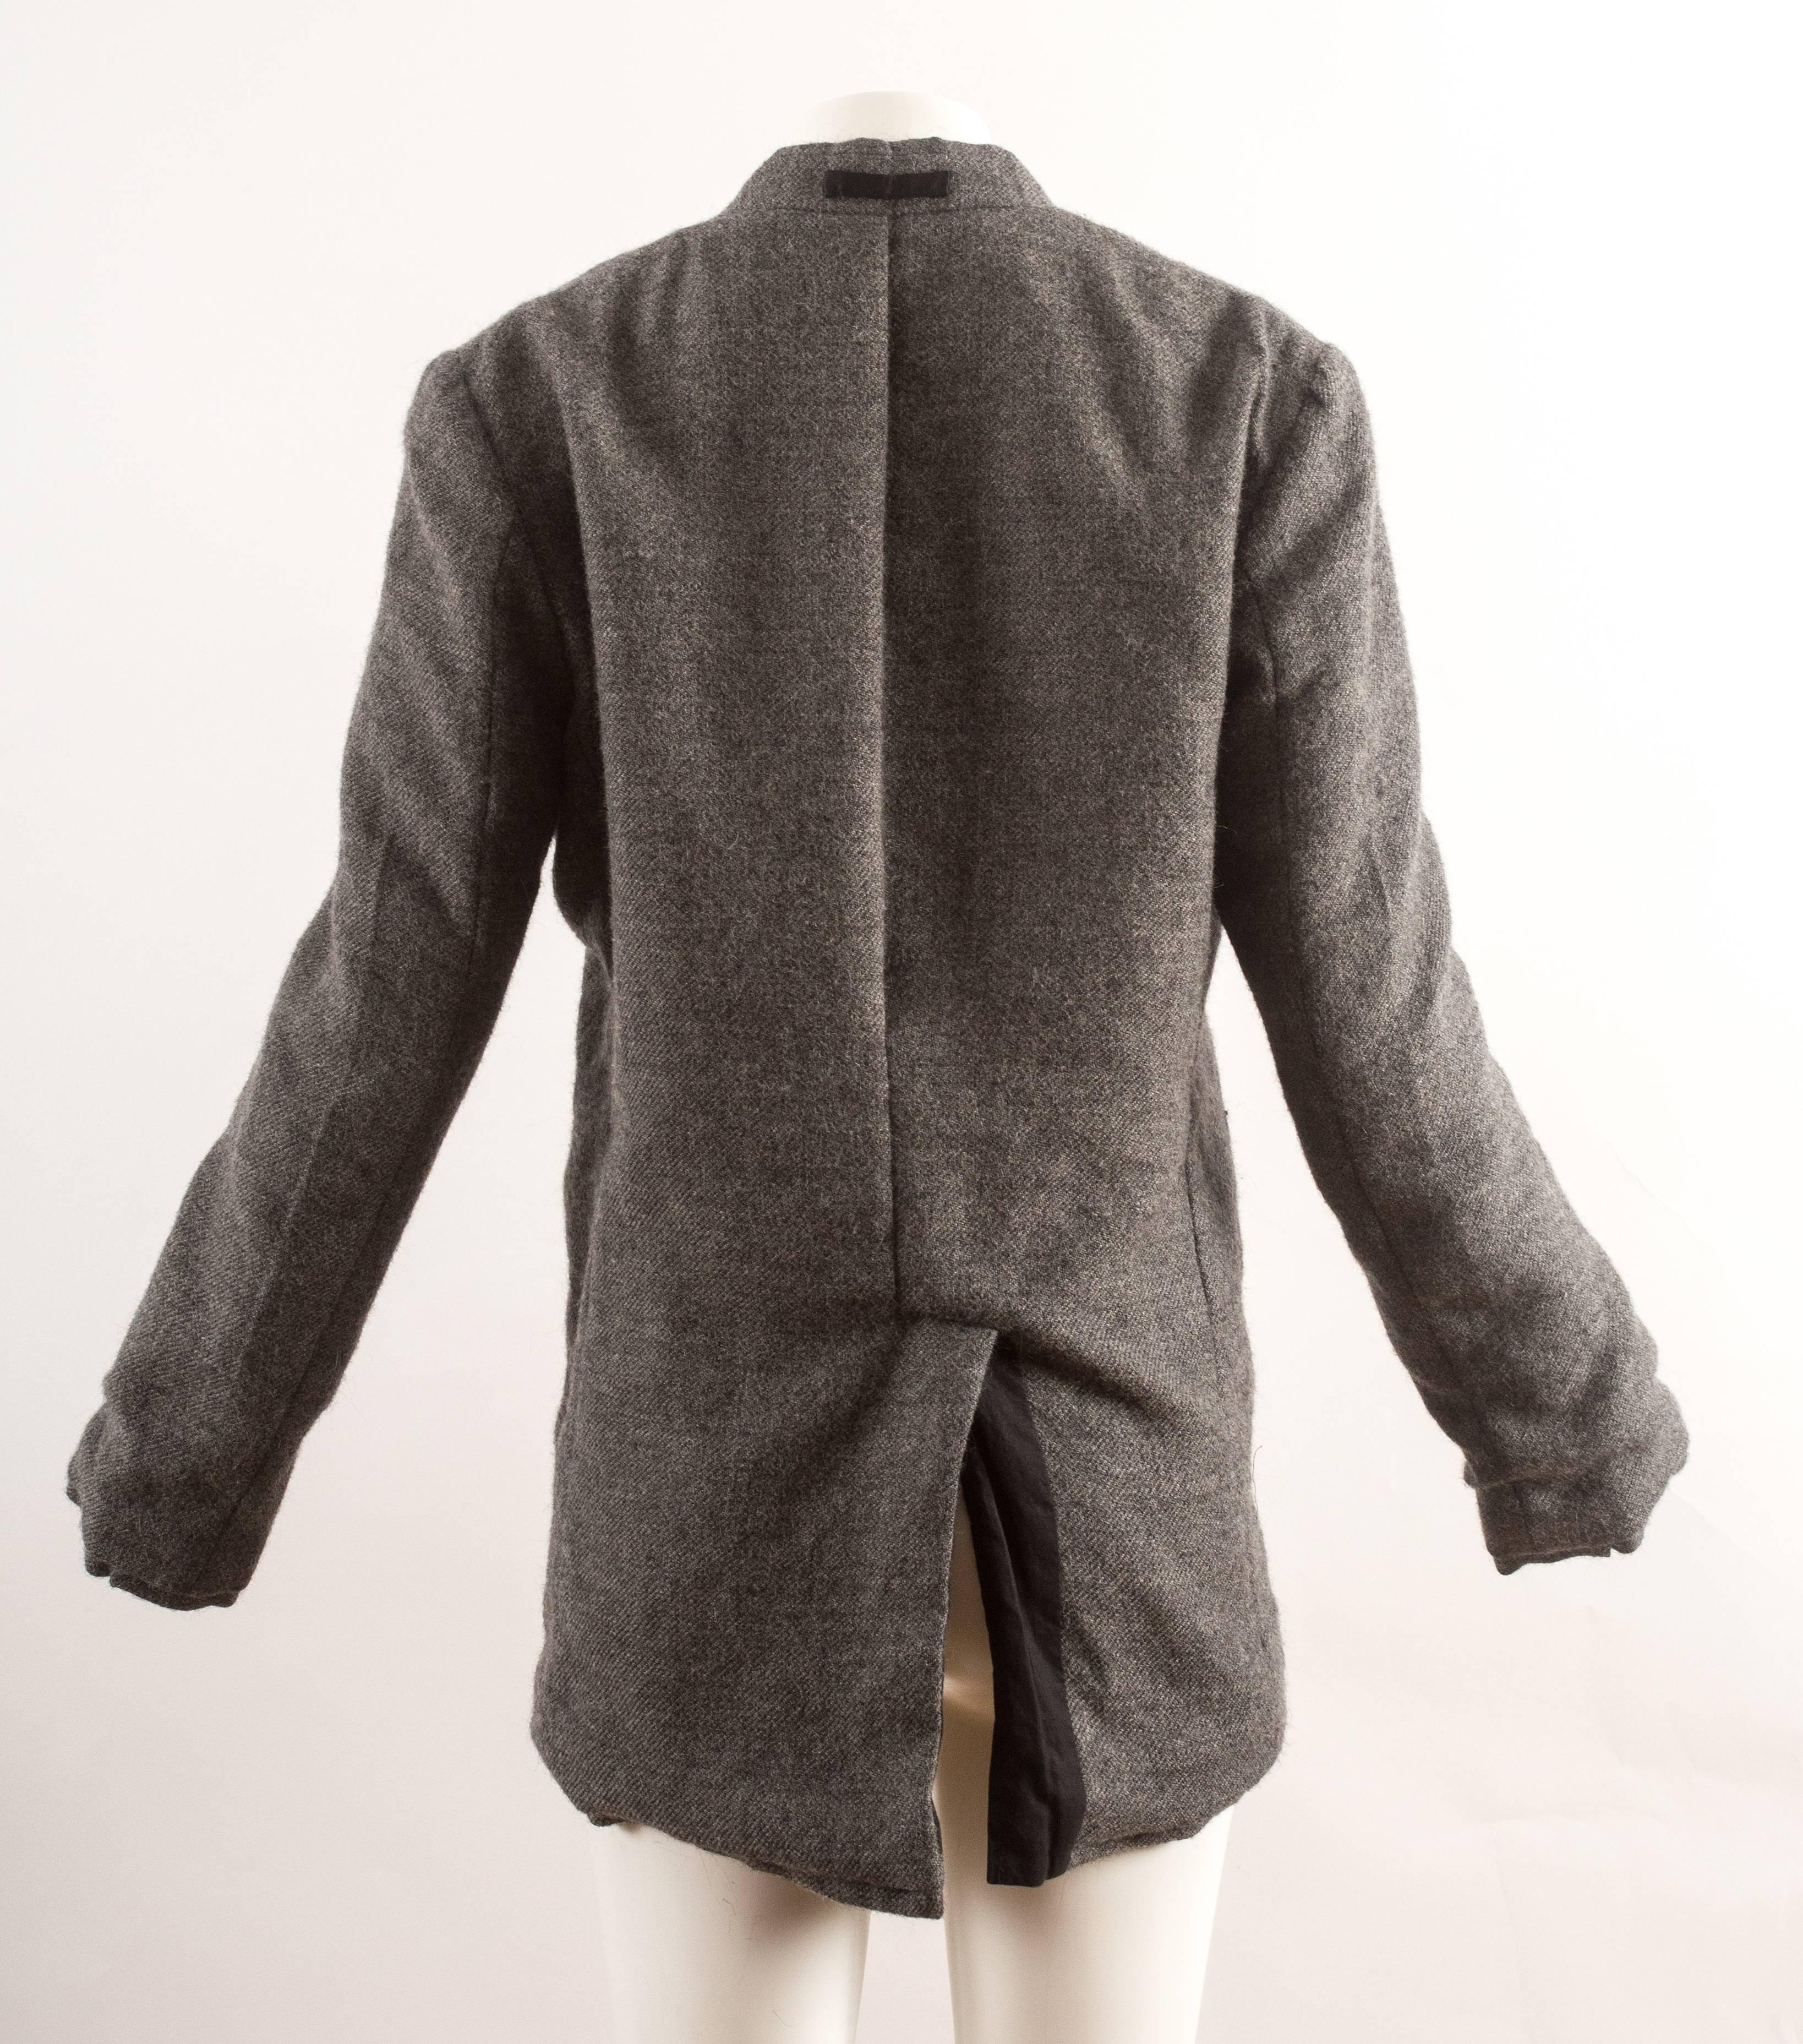 Maison Martin Margiela Autumn-Winter 2000 inside out grey wool jacket  In Excellent Condition In London, GB